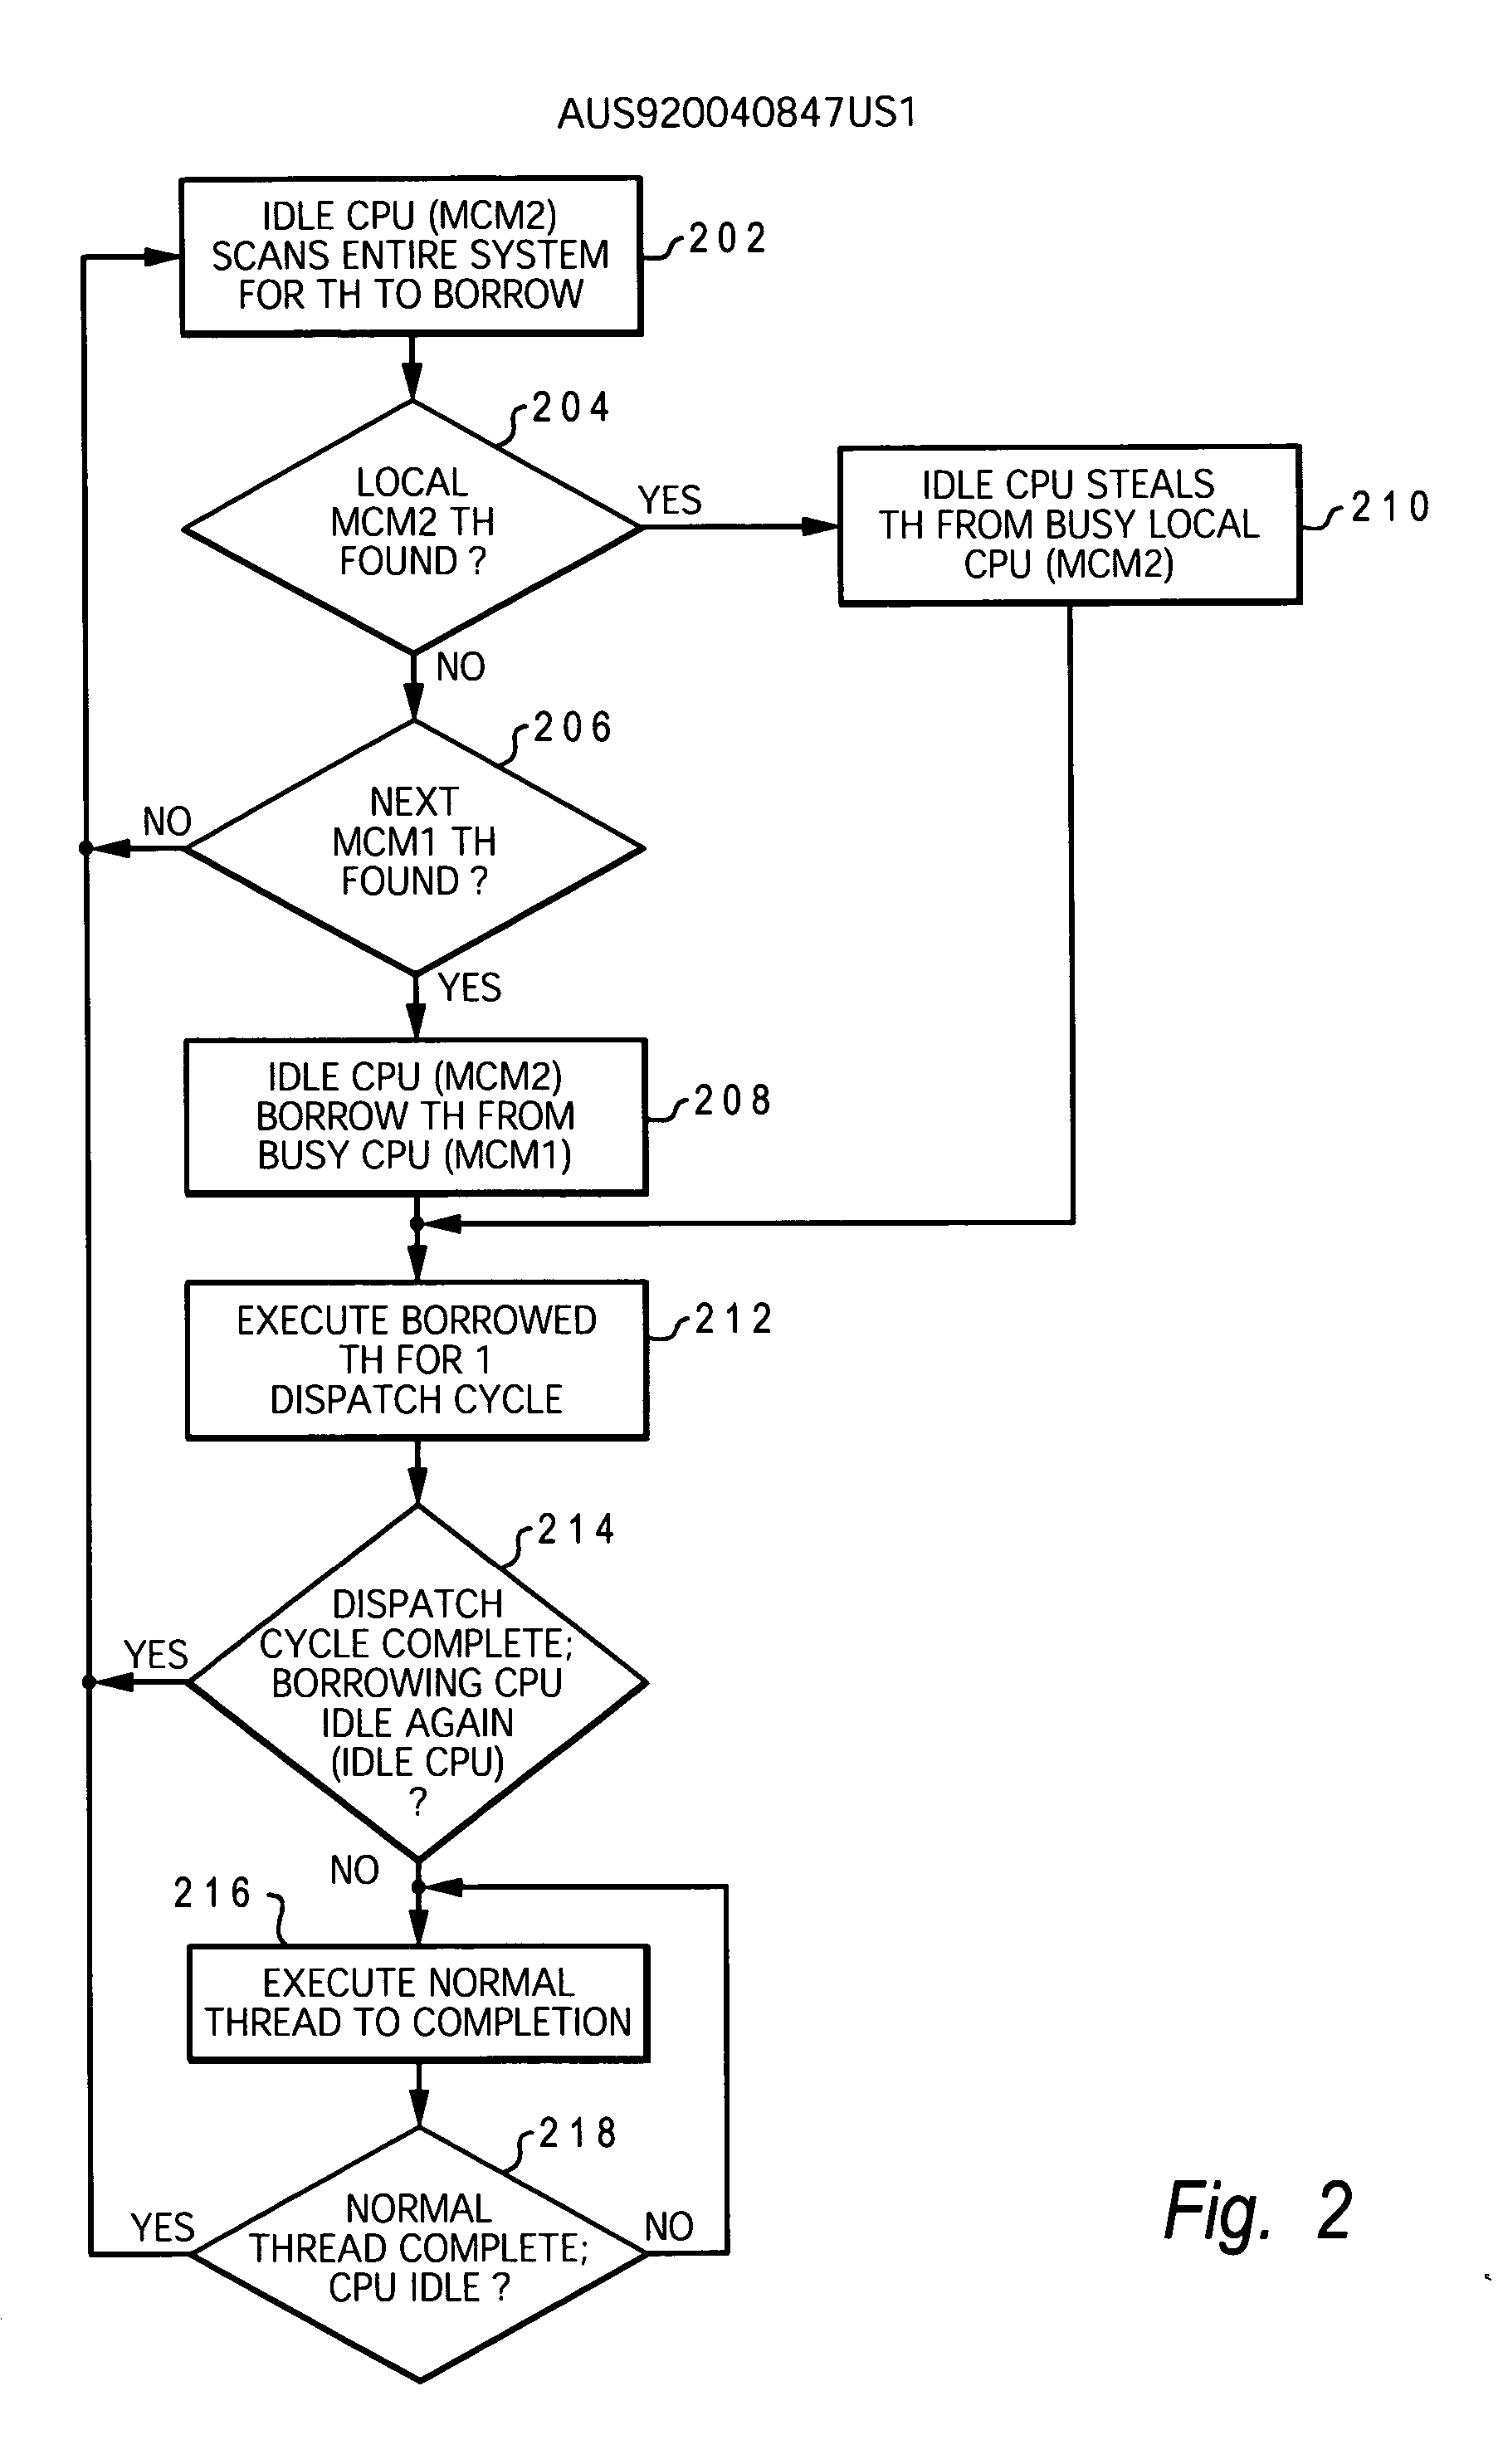 Borrowing threads as a form of load balancing in a multiprocessor data processing system